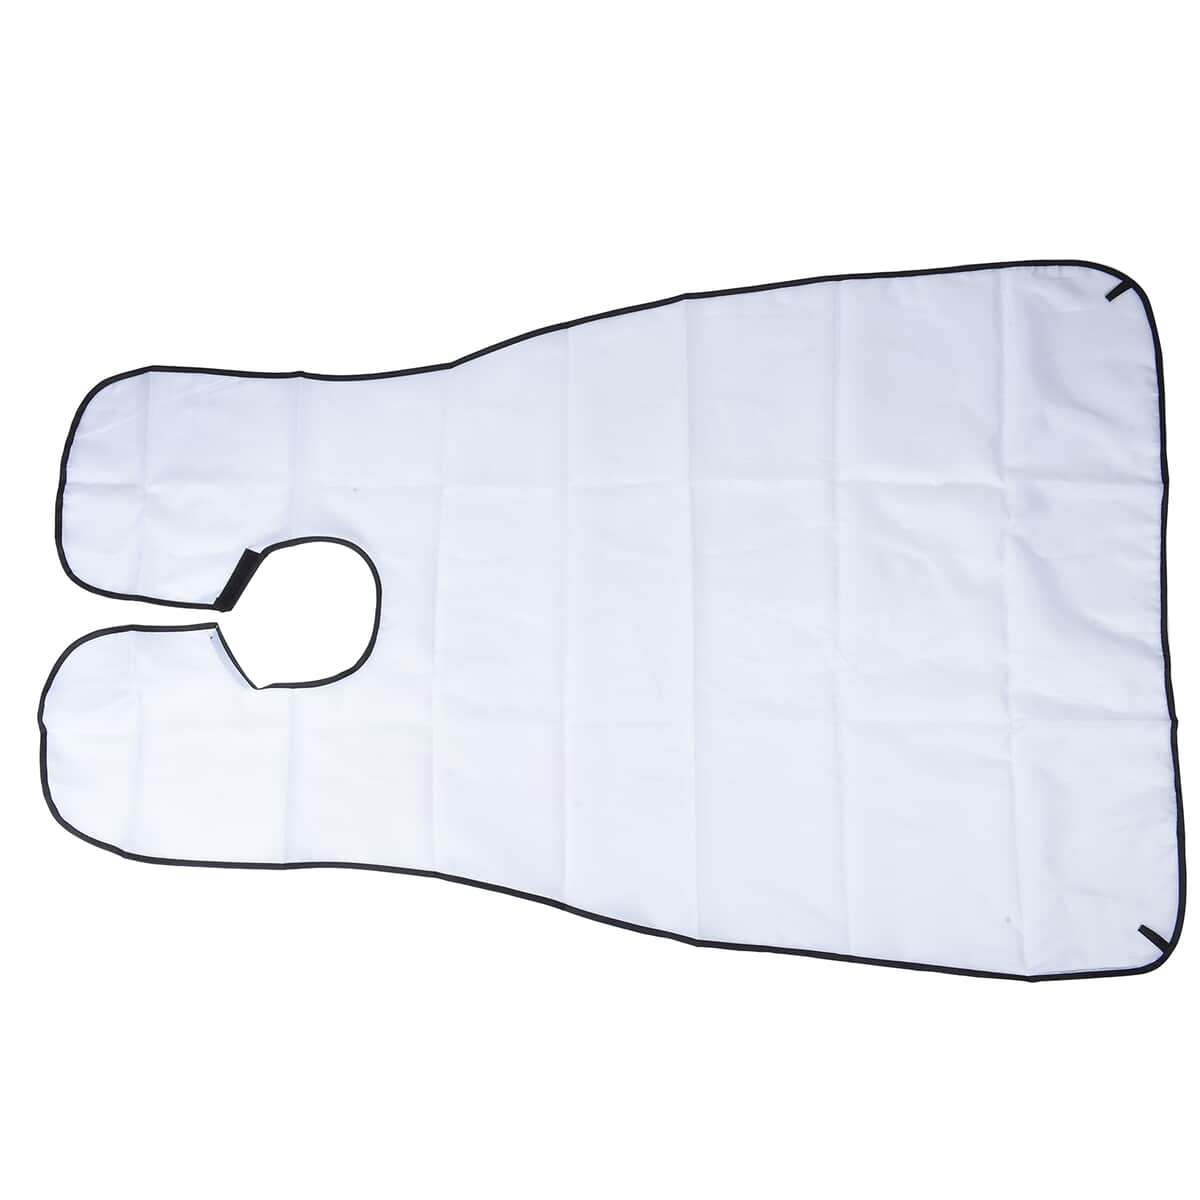 Male Beard Apron with 2 Suction Cup - White image number 0